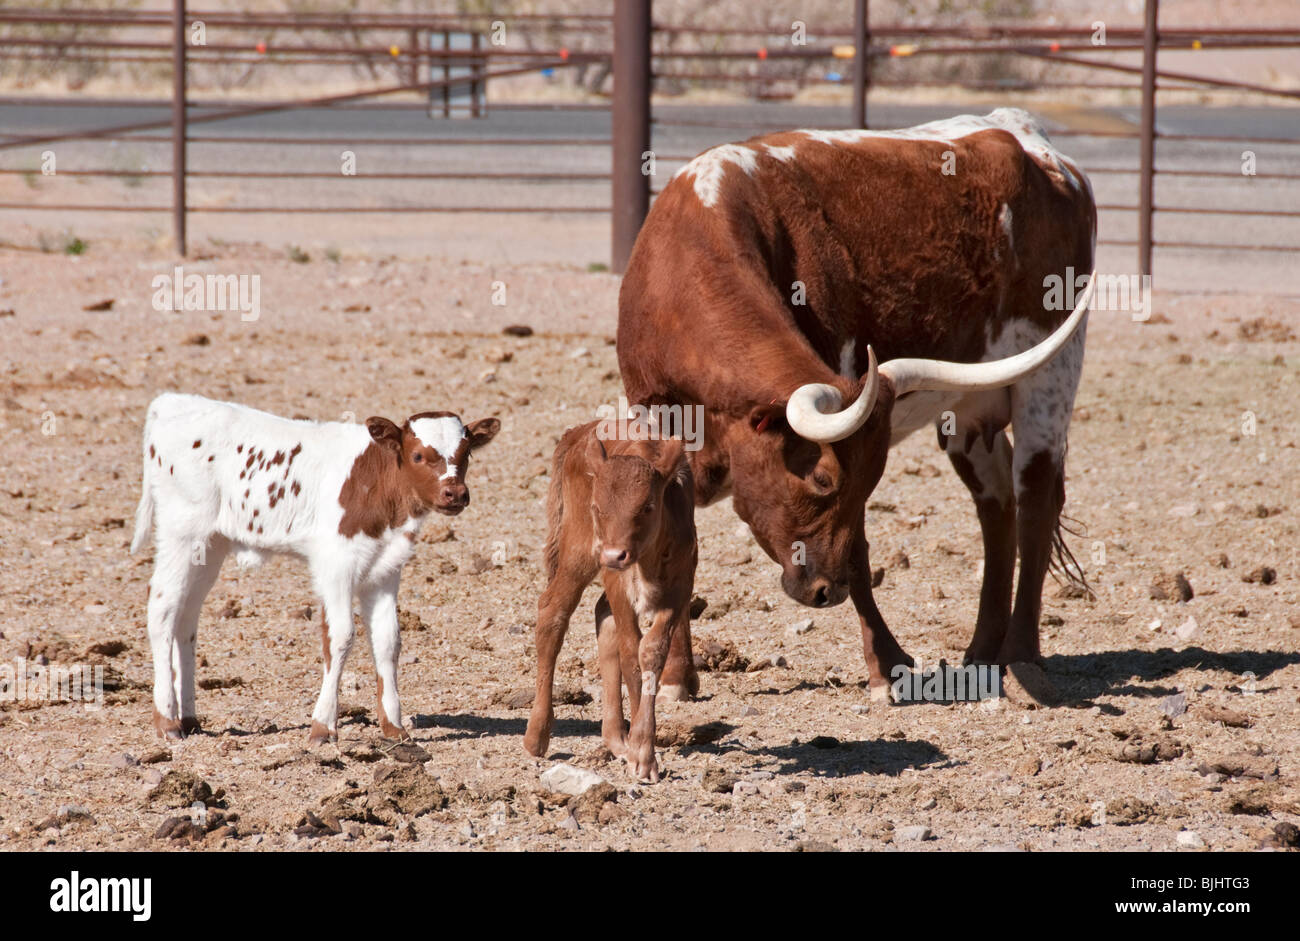 New Mexico, Las Cruces, New Mexico Farm & Ranch Heritage Museum, longhorn cattle cow with calves Stock Photo